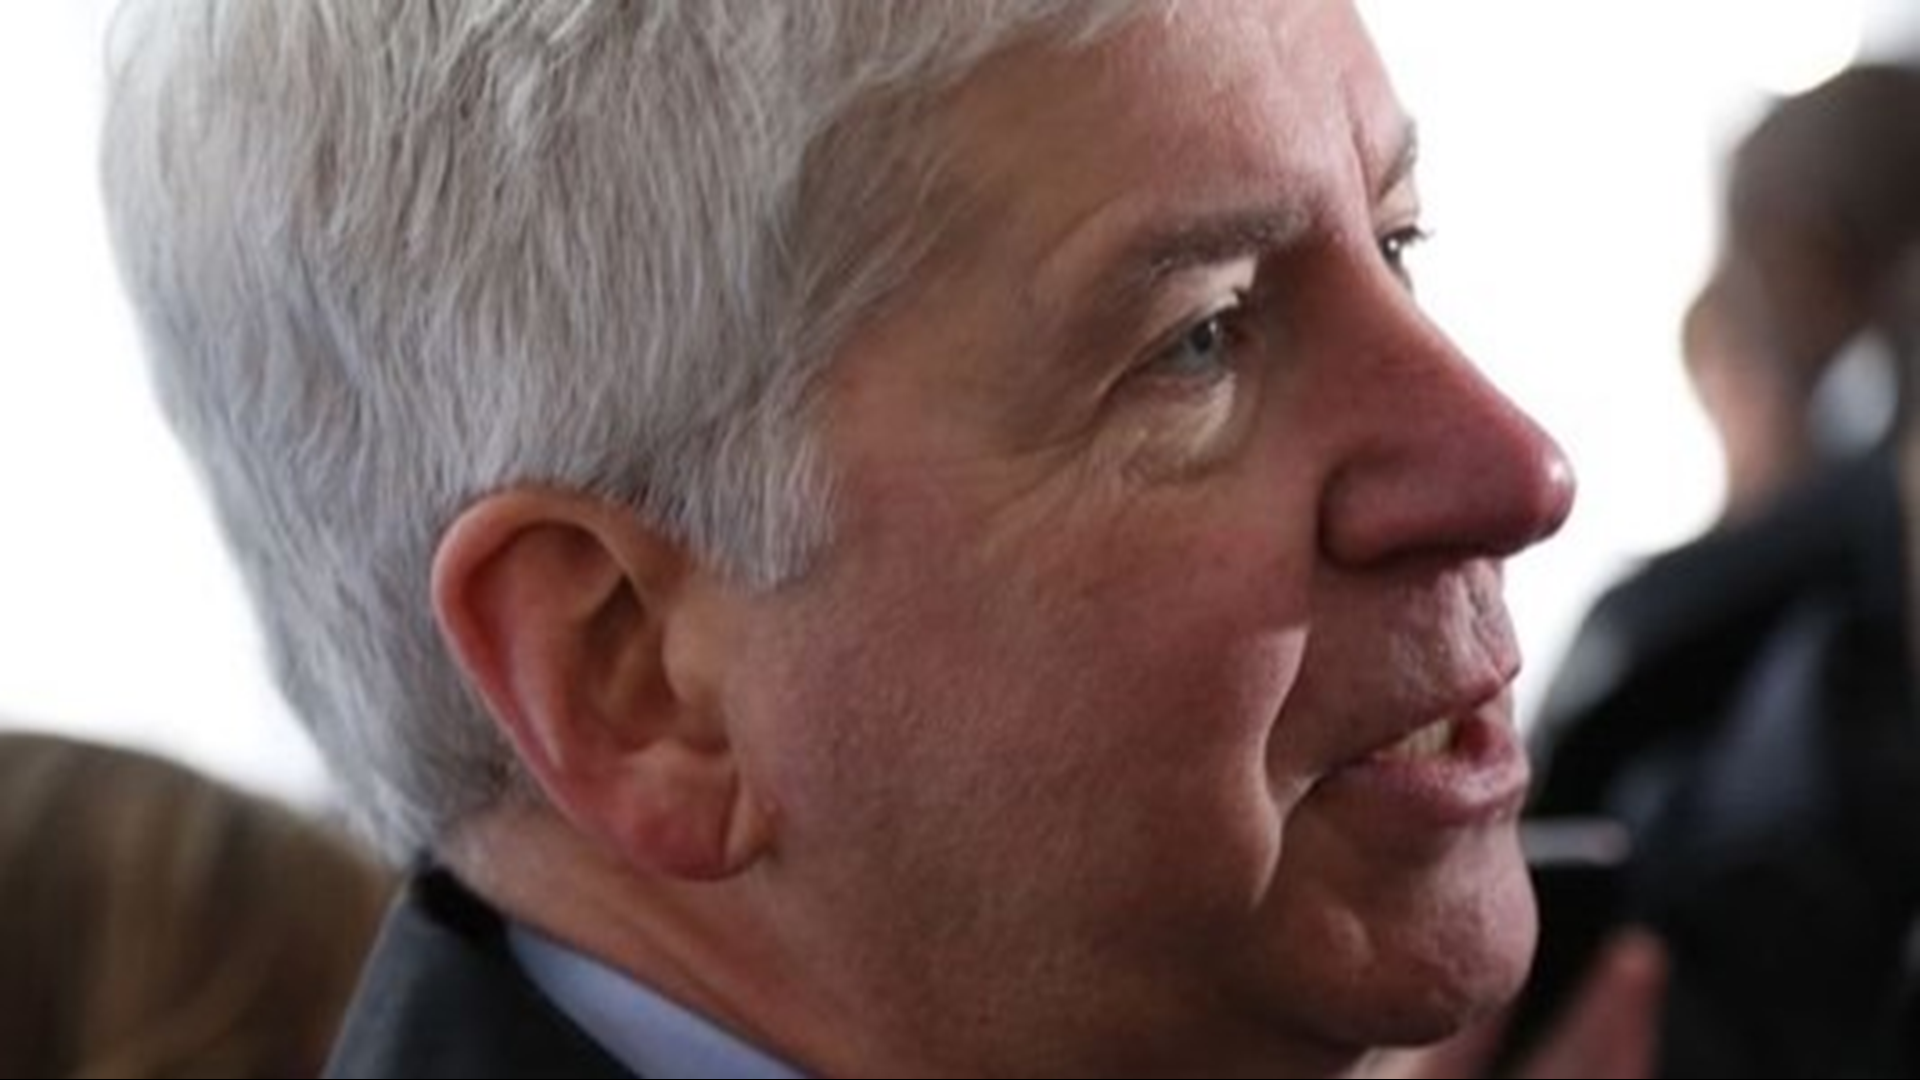 Former Michigan Gov. Rick Snyder was charged Wednesday with two counts of willful neglect of duty stemming from an investigation of the Flint water crisis.